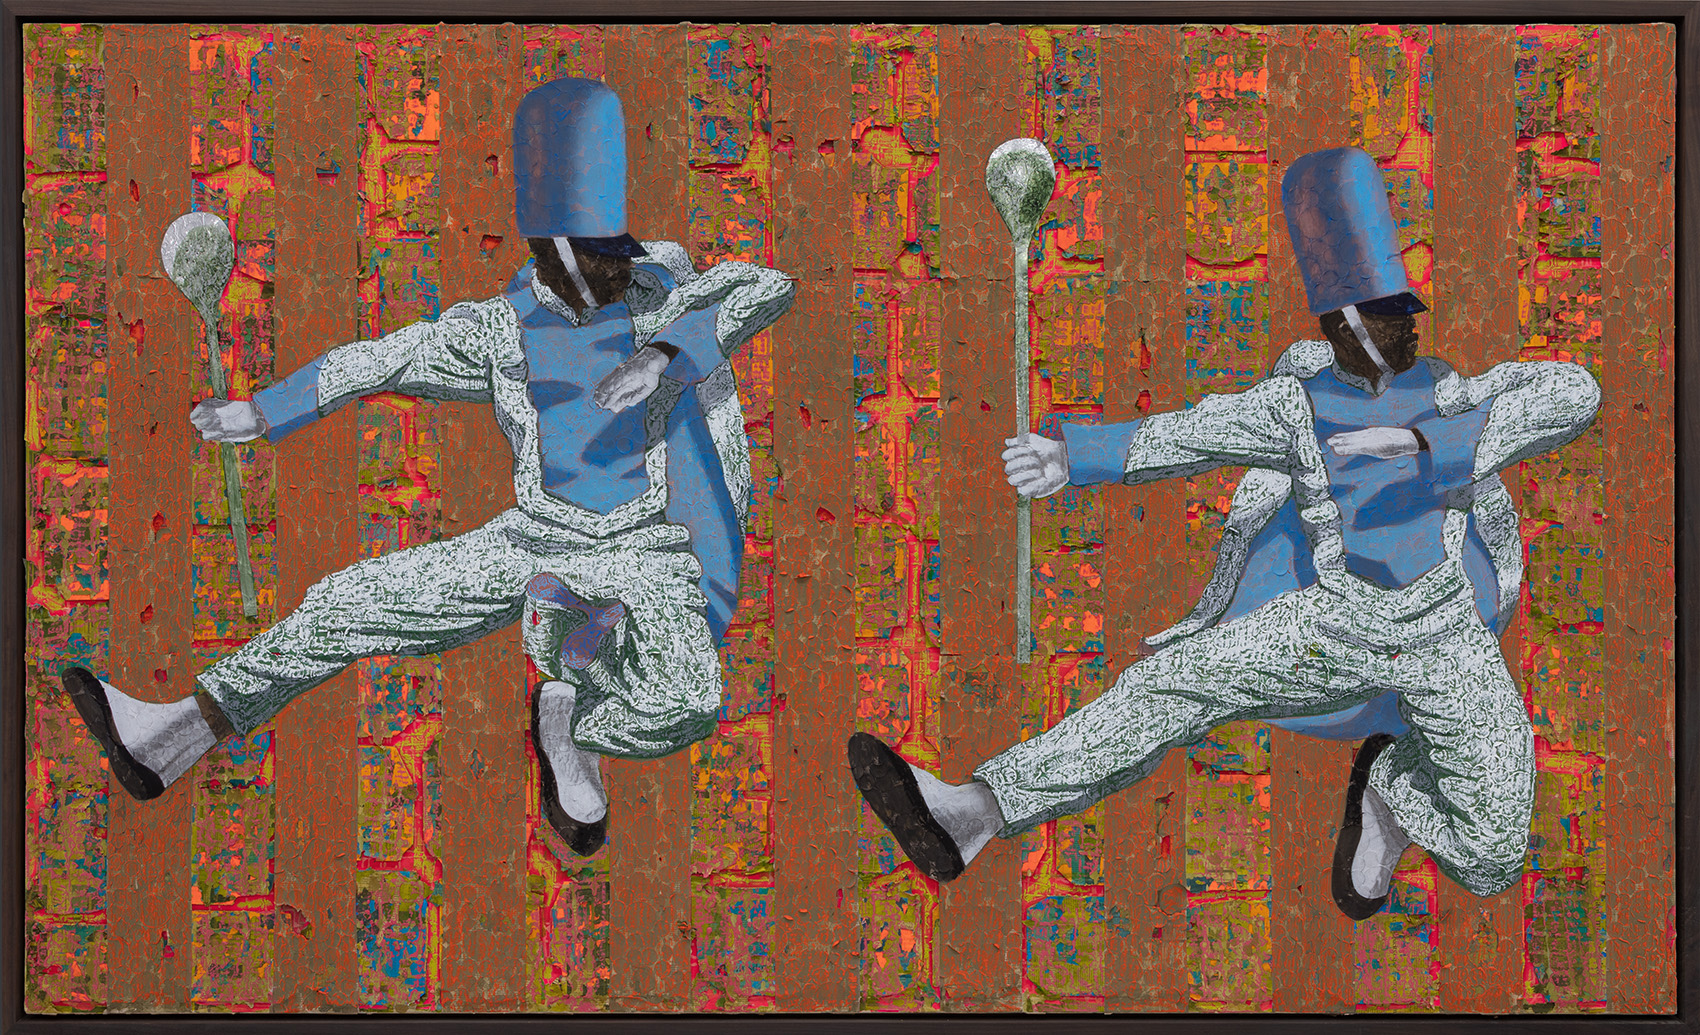 Collage piece showing two Black men in marching band uniforms jumping into the air